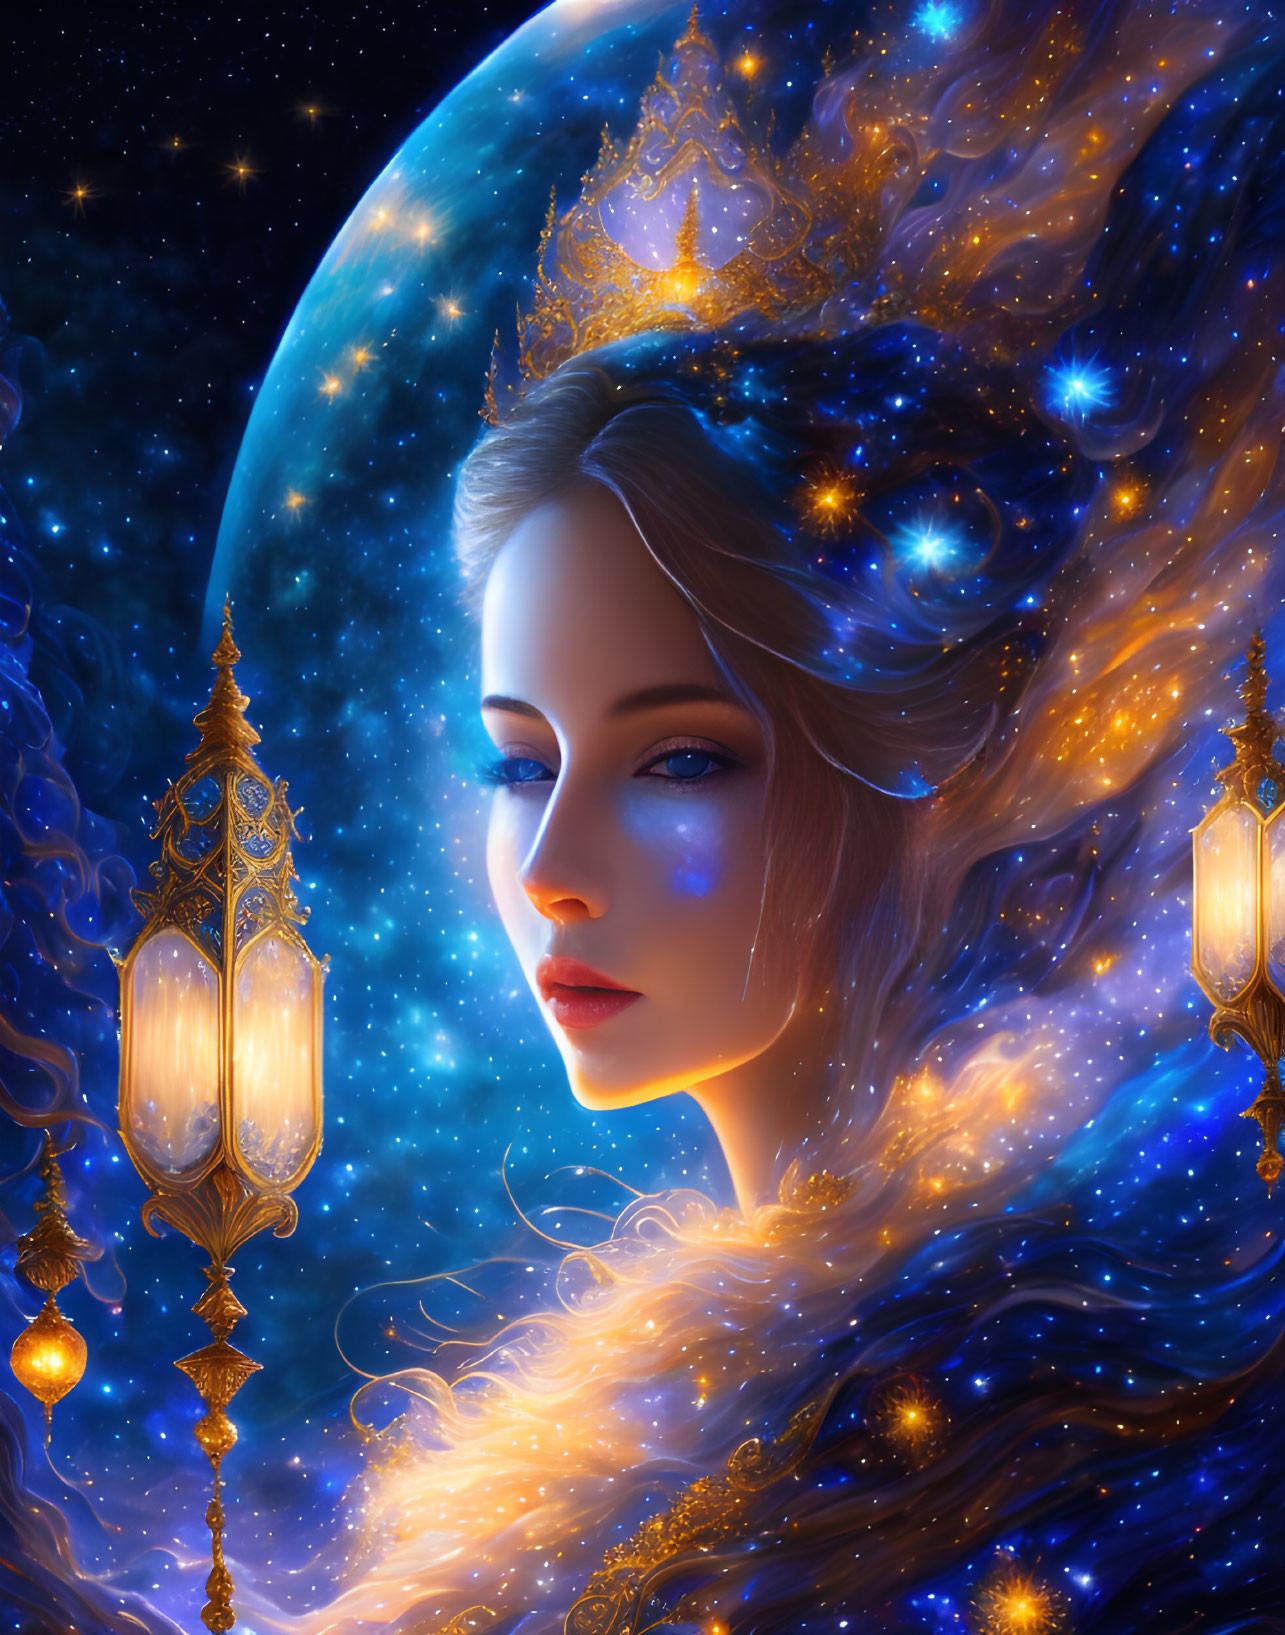 Mystical woman with luminous star-adorned hair in celestial setting